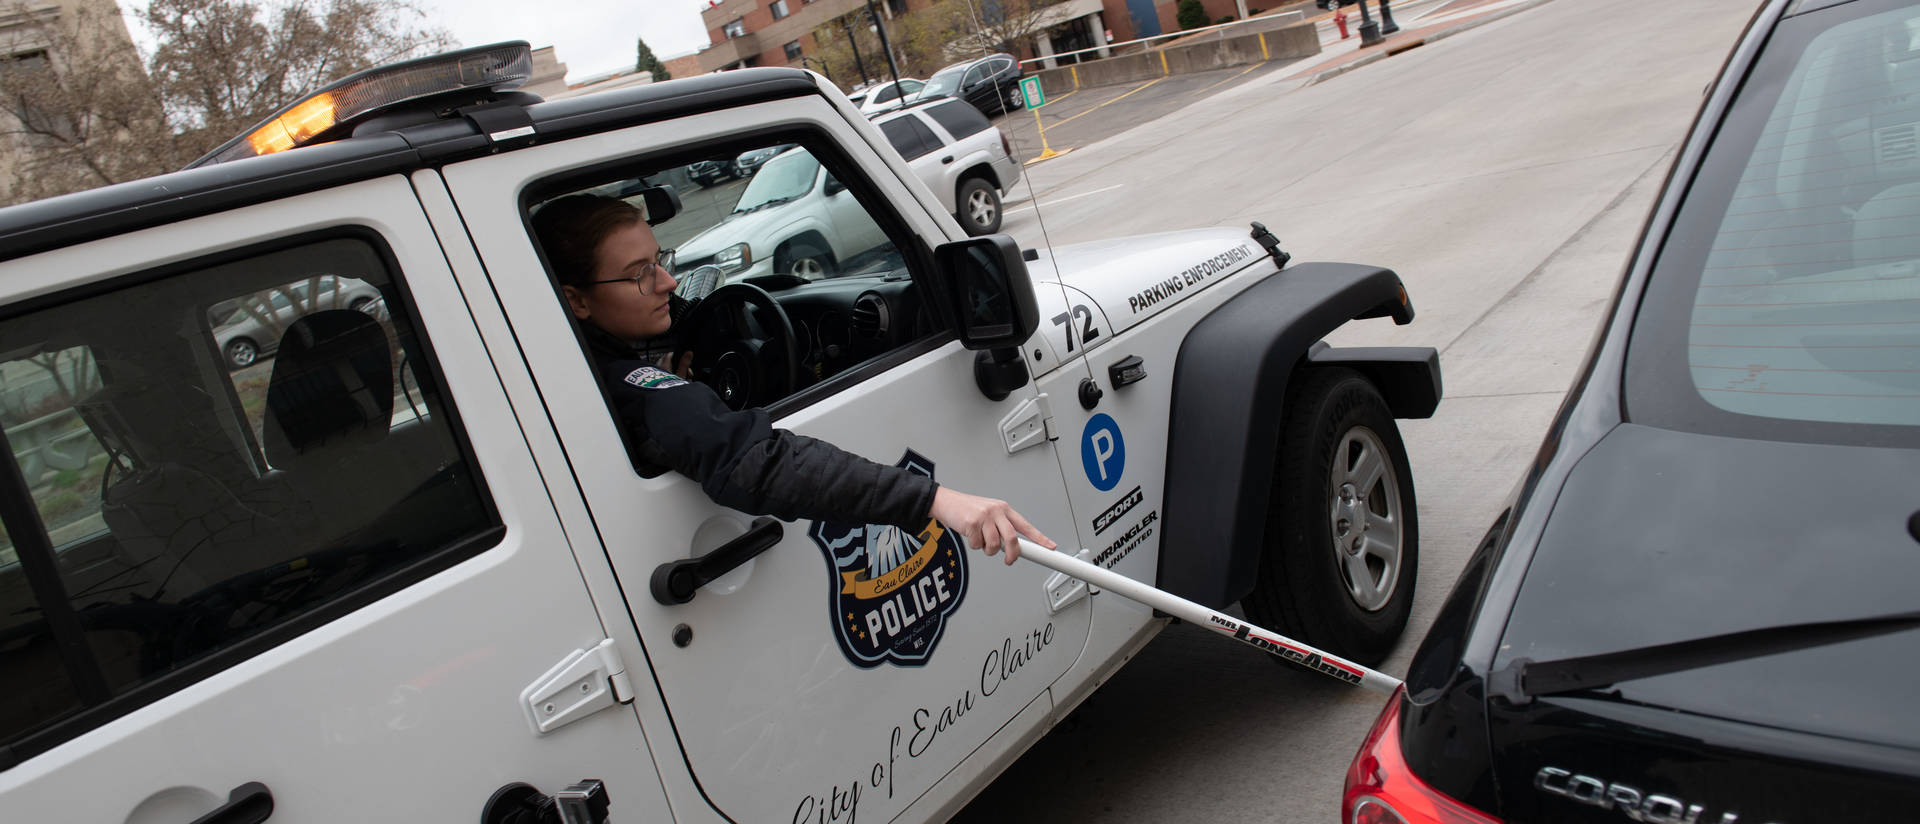 Person marks car tires in an Eau Claire Police parking enforcement vehicle.